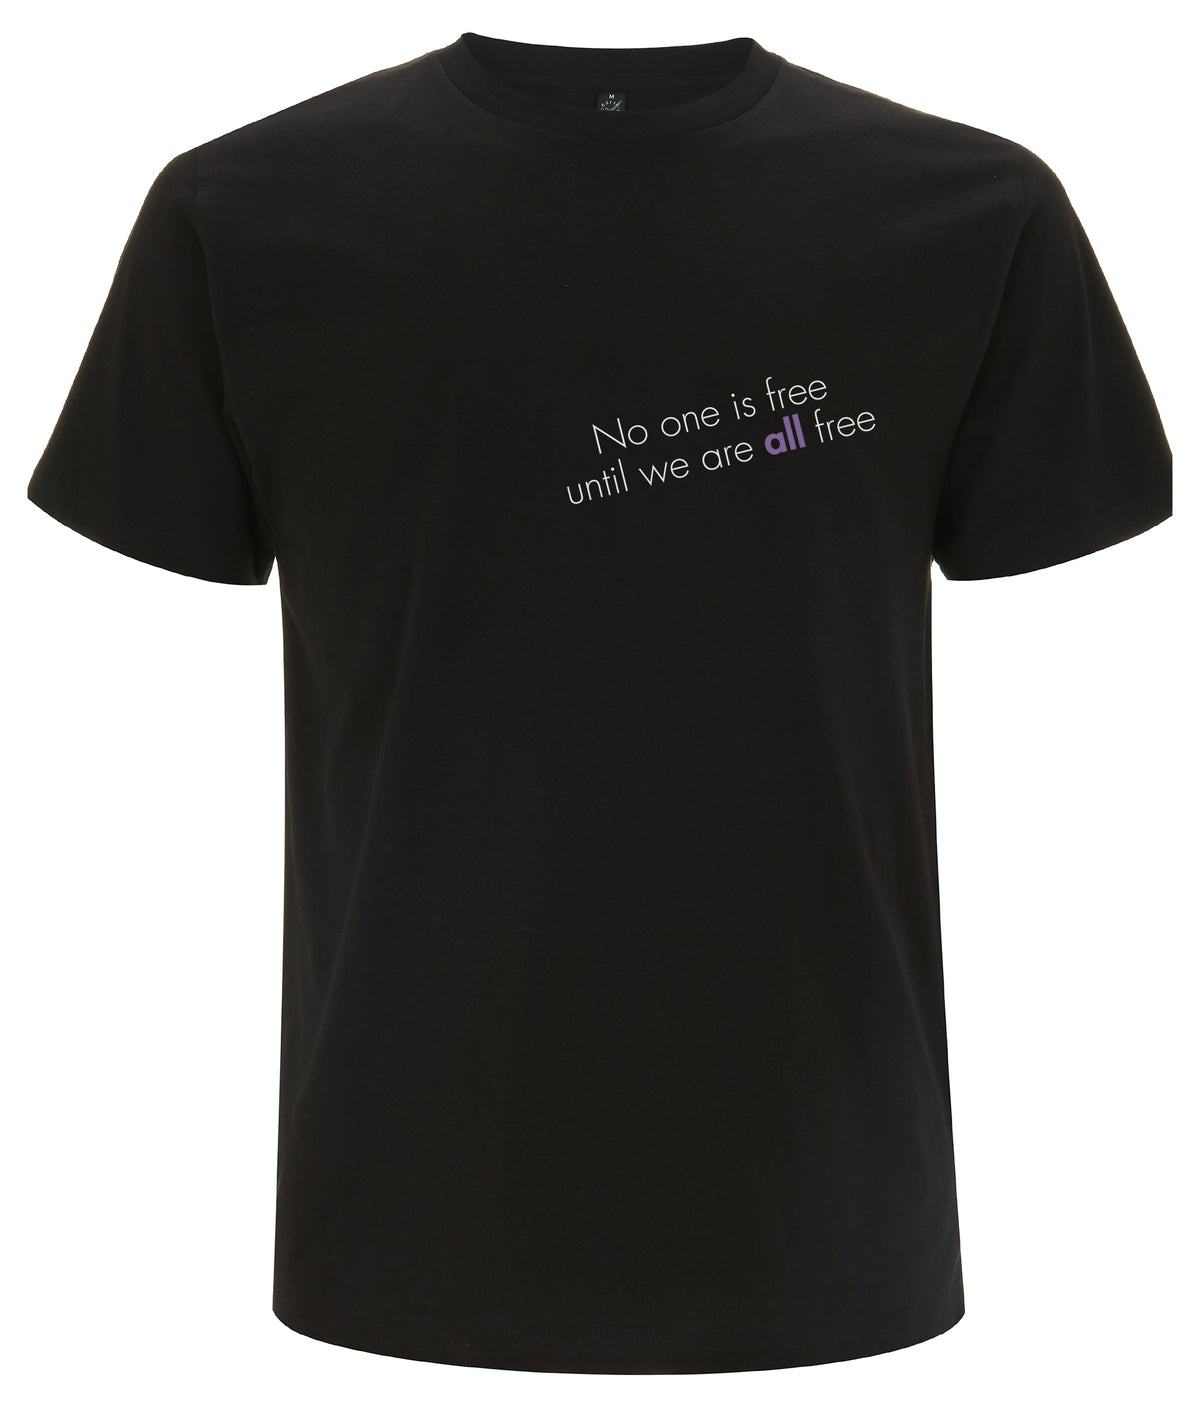 No One Is Free Until We Are All Free Organic Feminist T Shirt Black